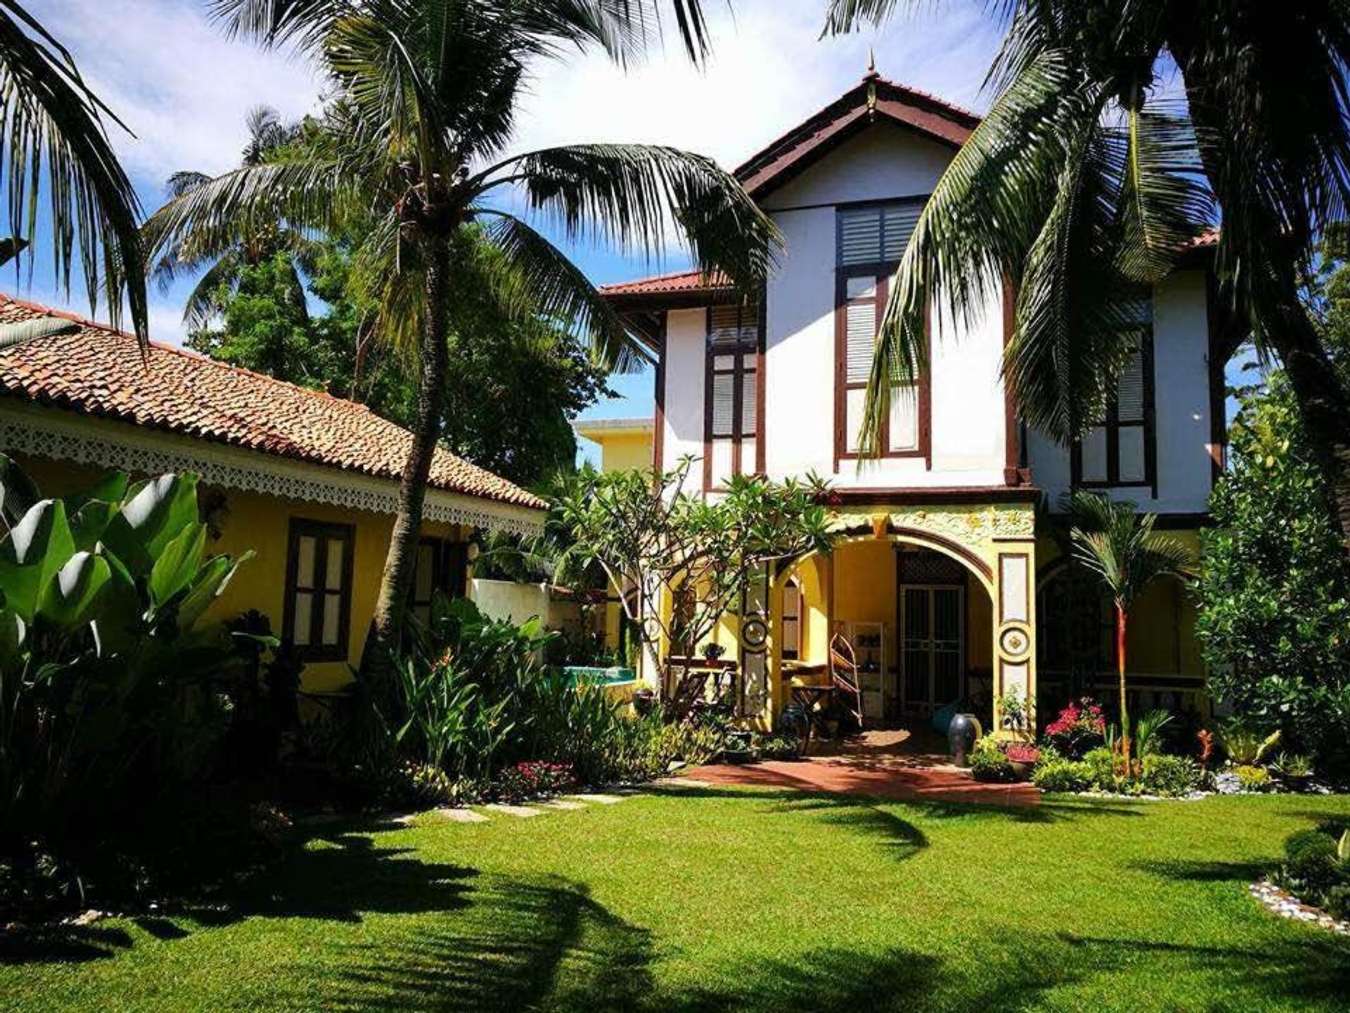 Casugria Dutch Boutique Heritage Bed & Breakfast Malacca - Homestay Melaka Private Pool